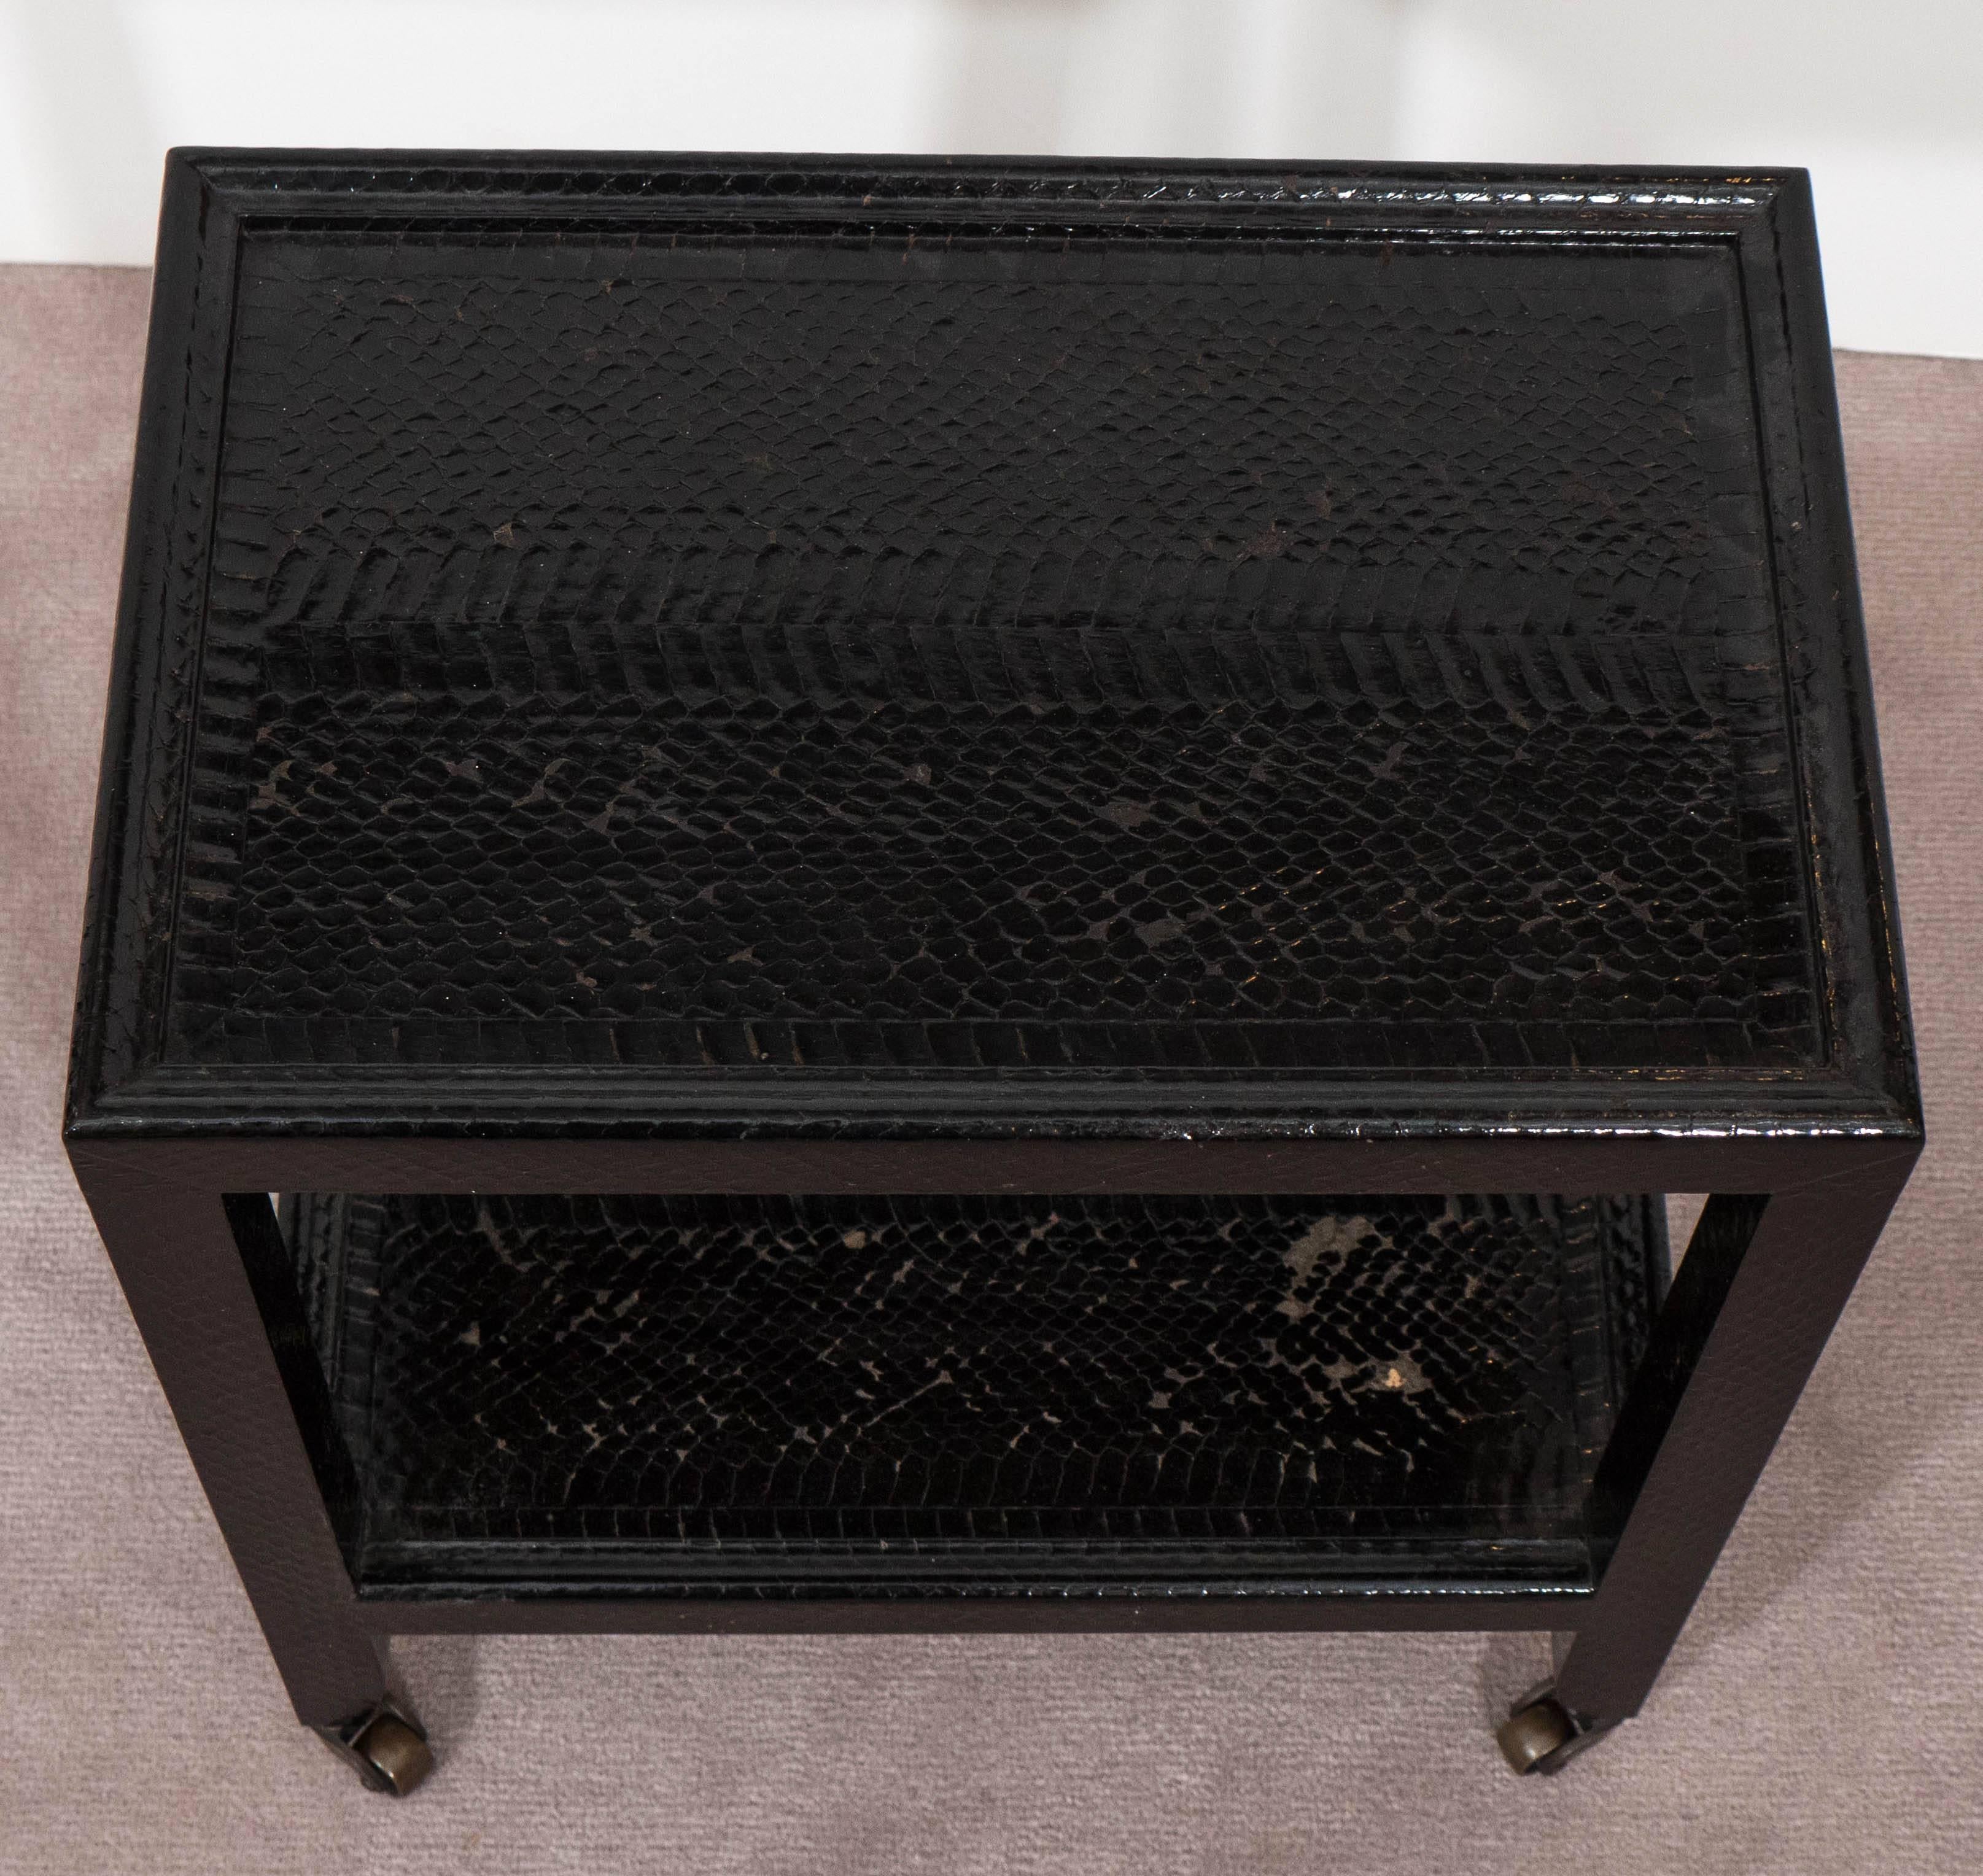 A small-scale two-tier telephone table, produced by Karl Springer circa 1980s, in black snakeskin on brass casters. Markings include signature and date [Karl Springer 1983], affixed to the underside of the bottom tier. Good condition, consistent